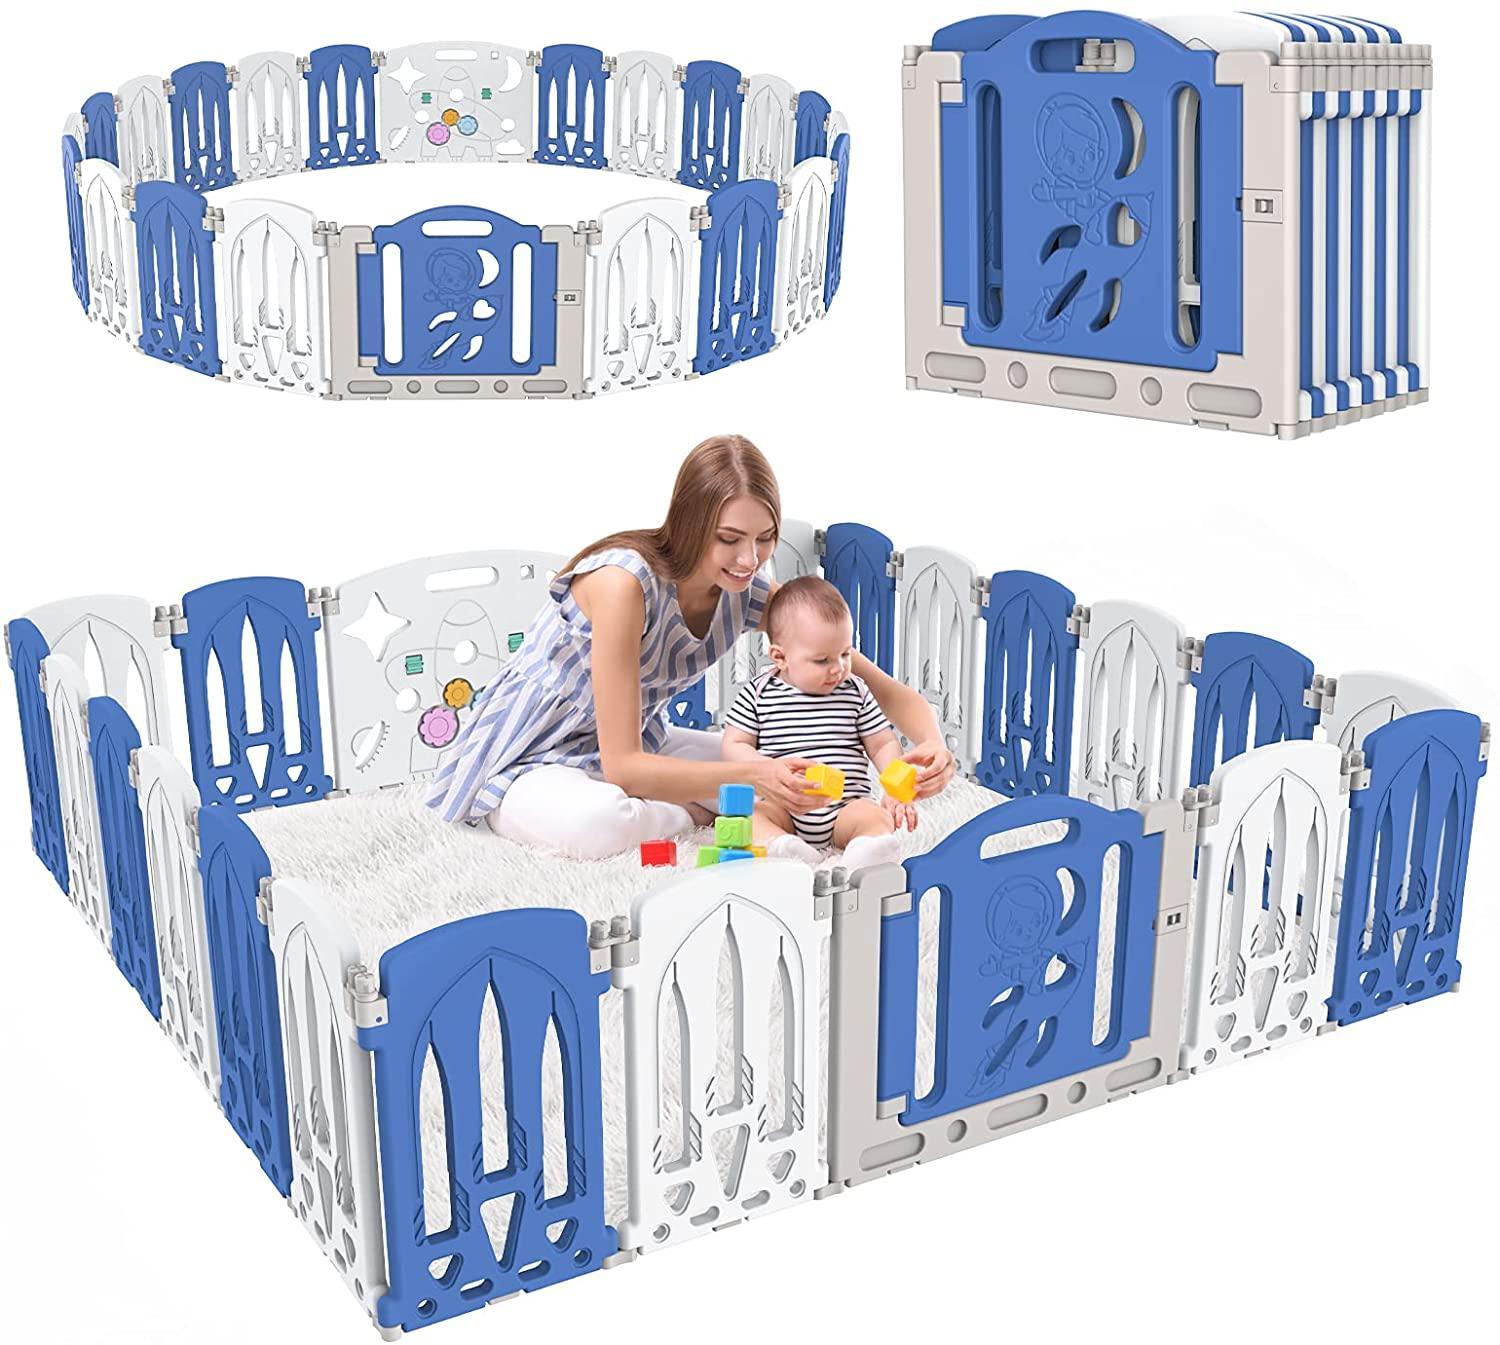 Advwin Baby Playpen 20+2 Panels Baby Play Pen Kids Activity Centre Safety Play Yard Home Indoor Outdoor Blue